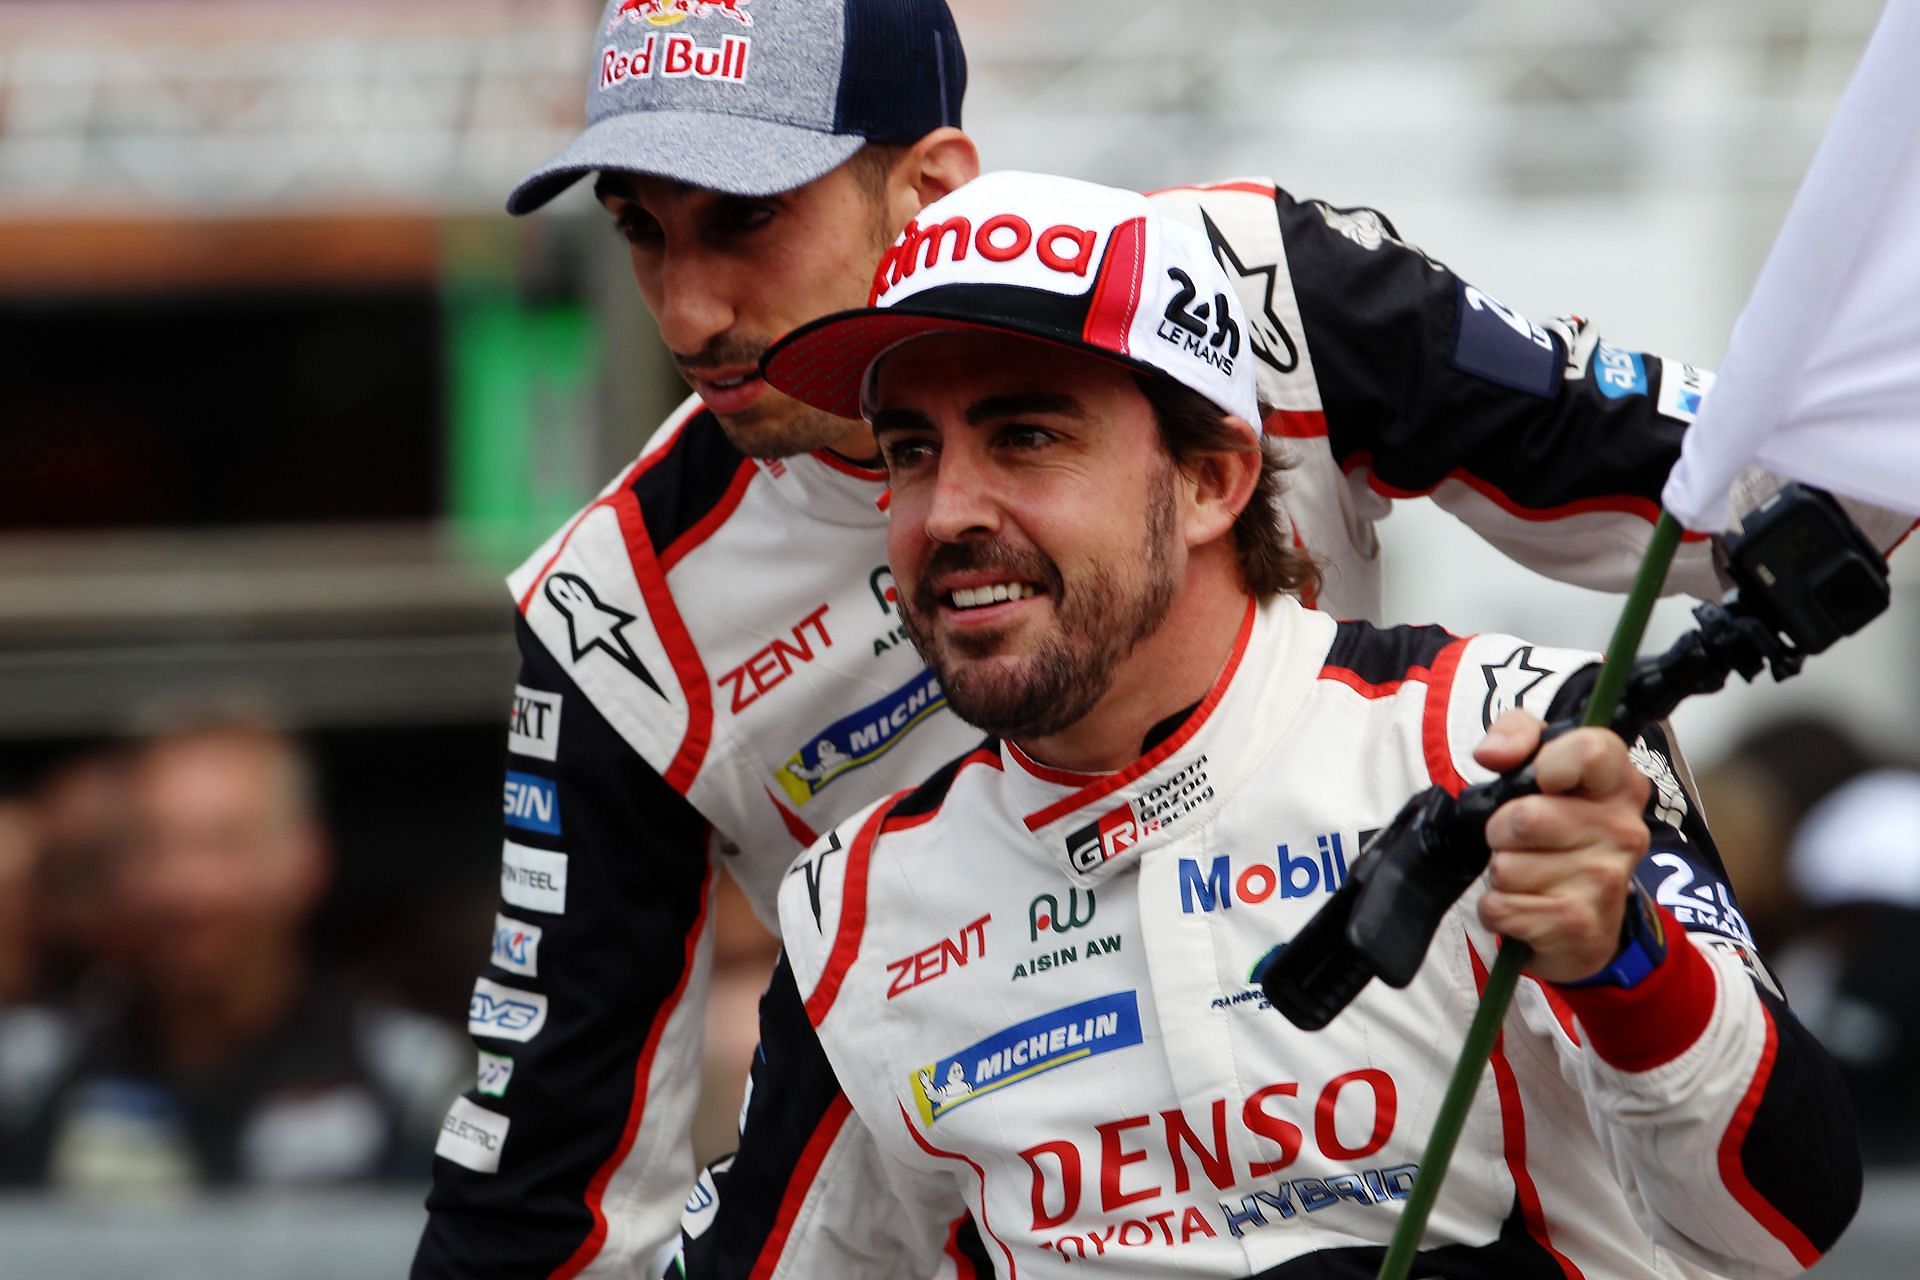 Fernando Alonso won two F1 and two Le Mans titles